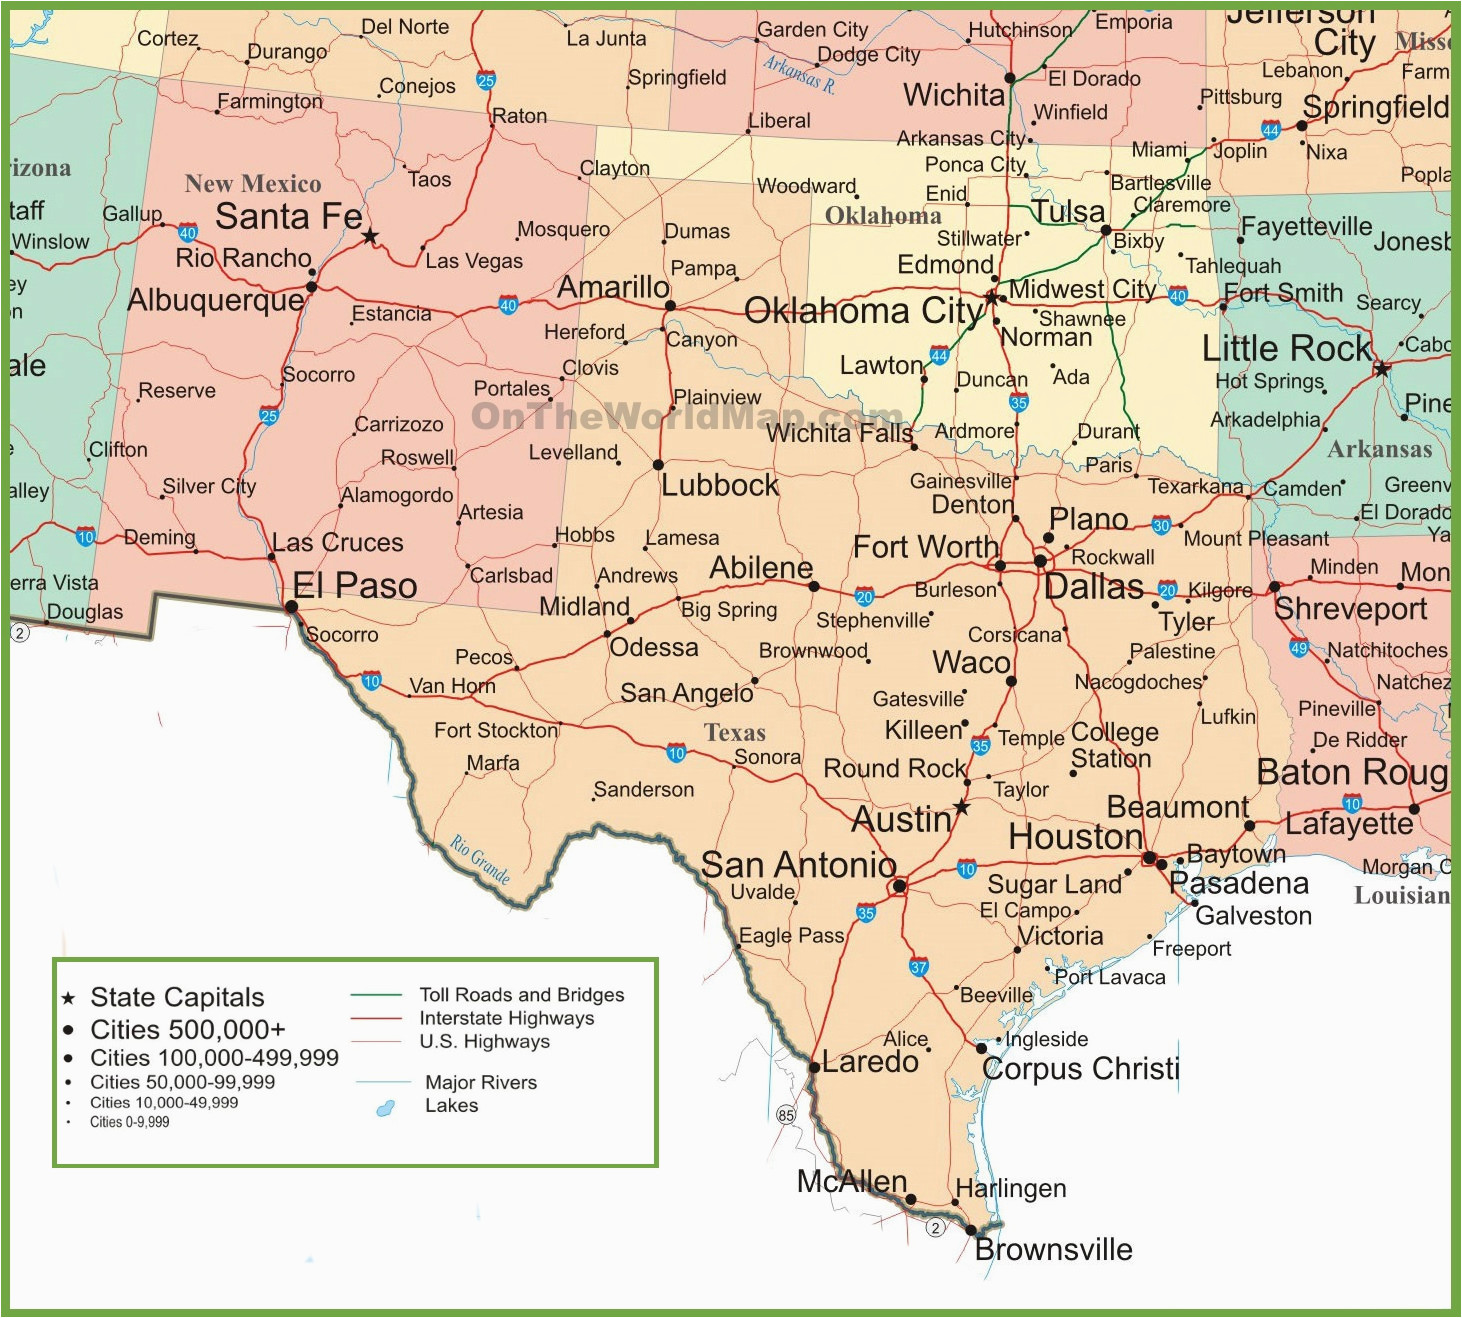 missouri map and surrounding states sonora is in nw mexico the